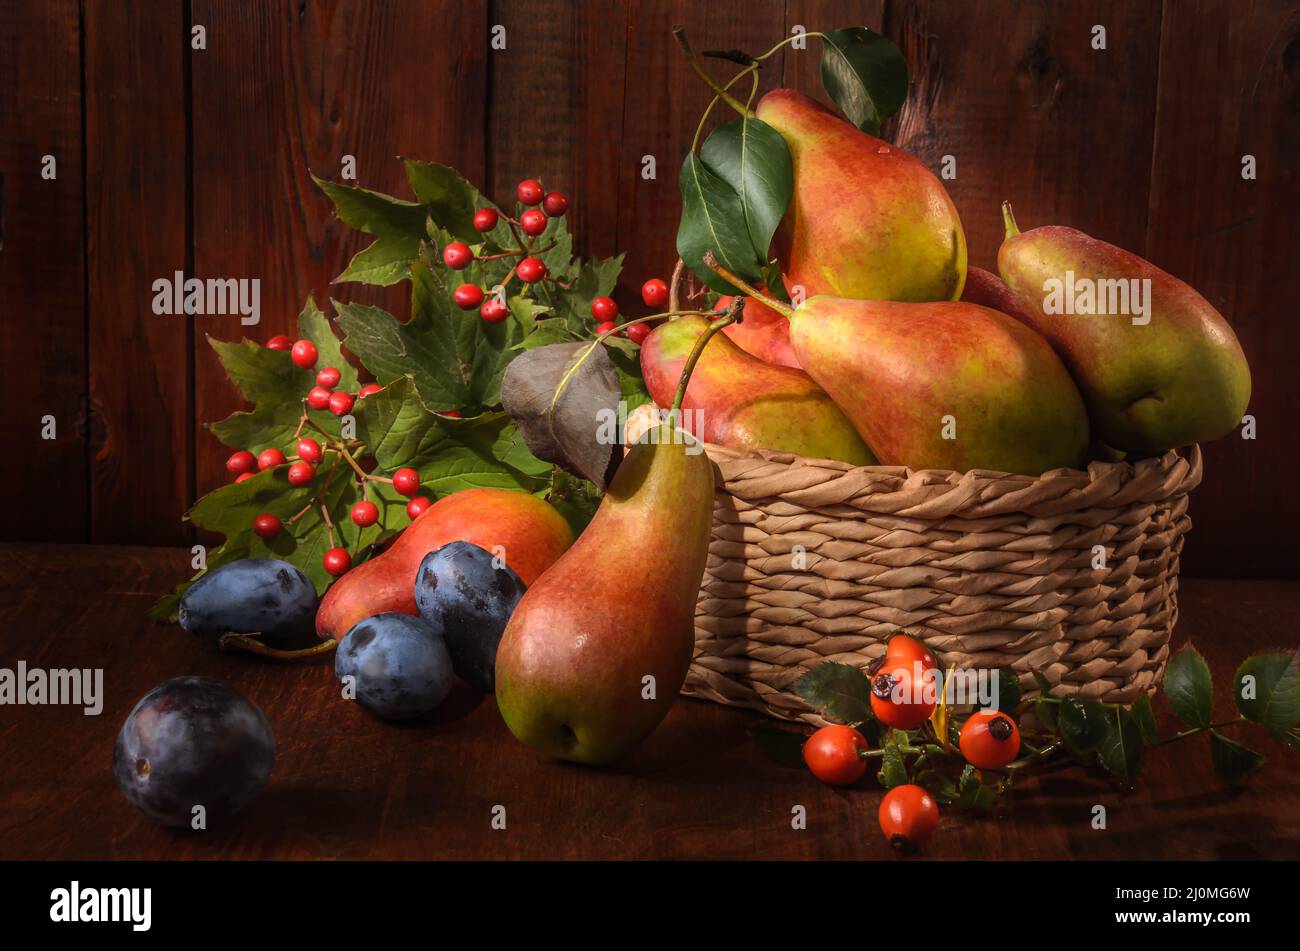 Pears in a basket and branches of wild rose and viburnum on a dark wooden background in a rustic style Stock Photo